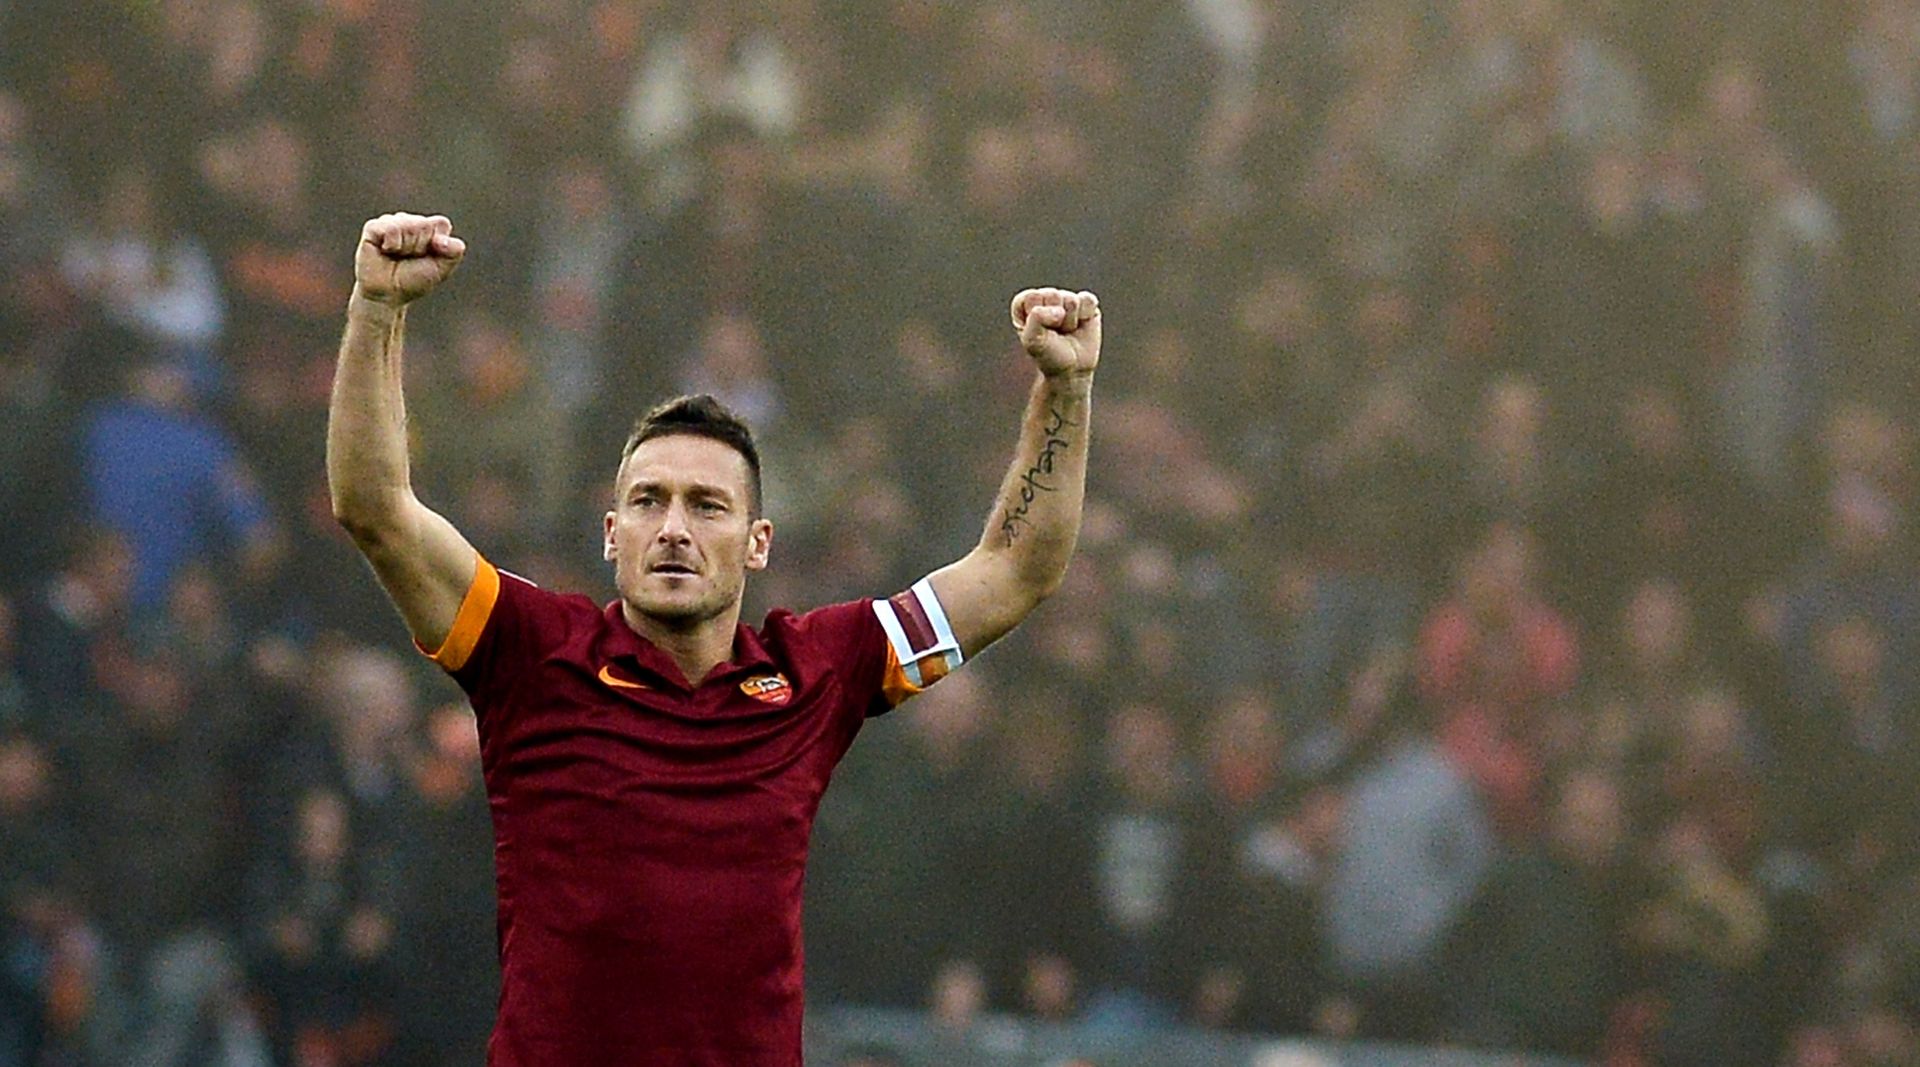 <p>                     Another Rome native who won the 2006 World Cup with Italy, Francesco Totti didn’t just become a Roma legend; he became the greatest player in the Giallorossi’s history, spending his entire career with them and retiring in 2017 with 619 Serie A appearances to his name.                   </p>                                      <p>                     Still going strong into the mid-10s, <em>Il Capitano</em> was named Europe’s most popular footballer by IFFHS in 2011.                   </p>